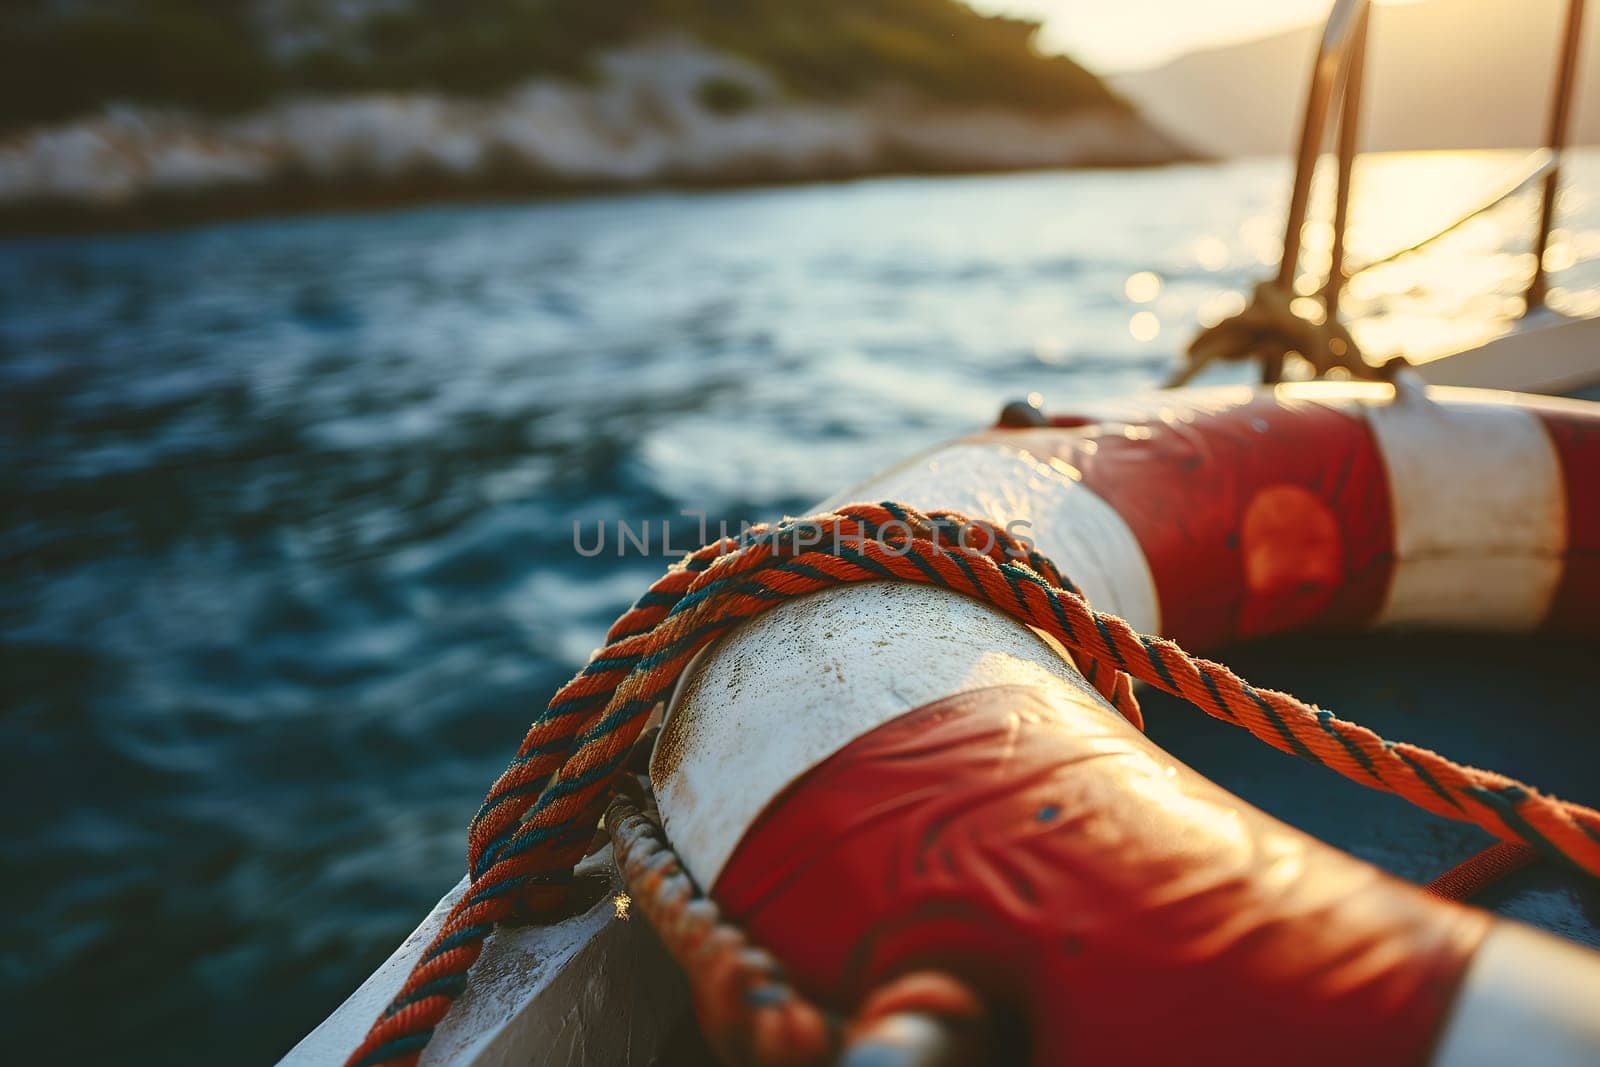 Lifebuoy attached to a ship's board, with the clear blue sea in the background. Neural network generated image. Not based on any actual scene or pattern.